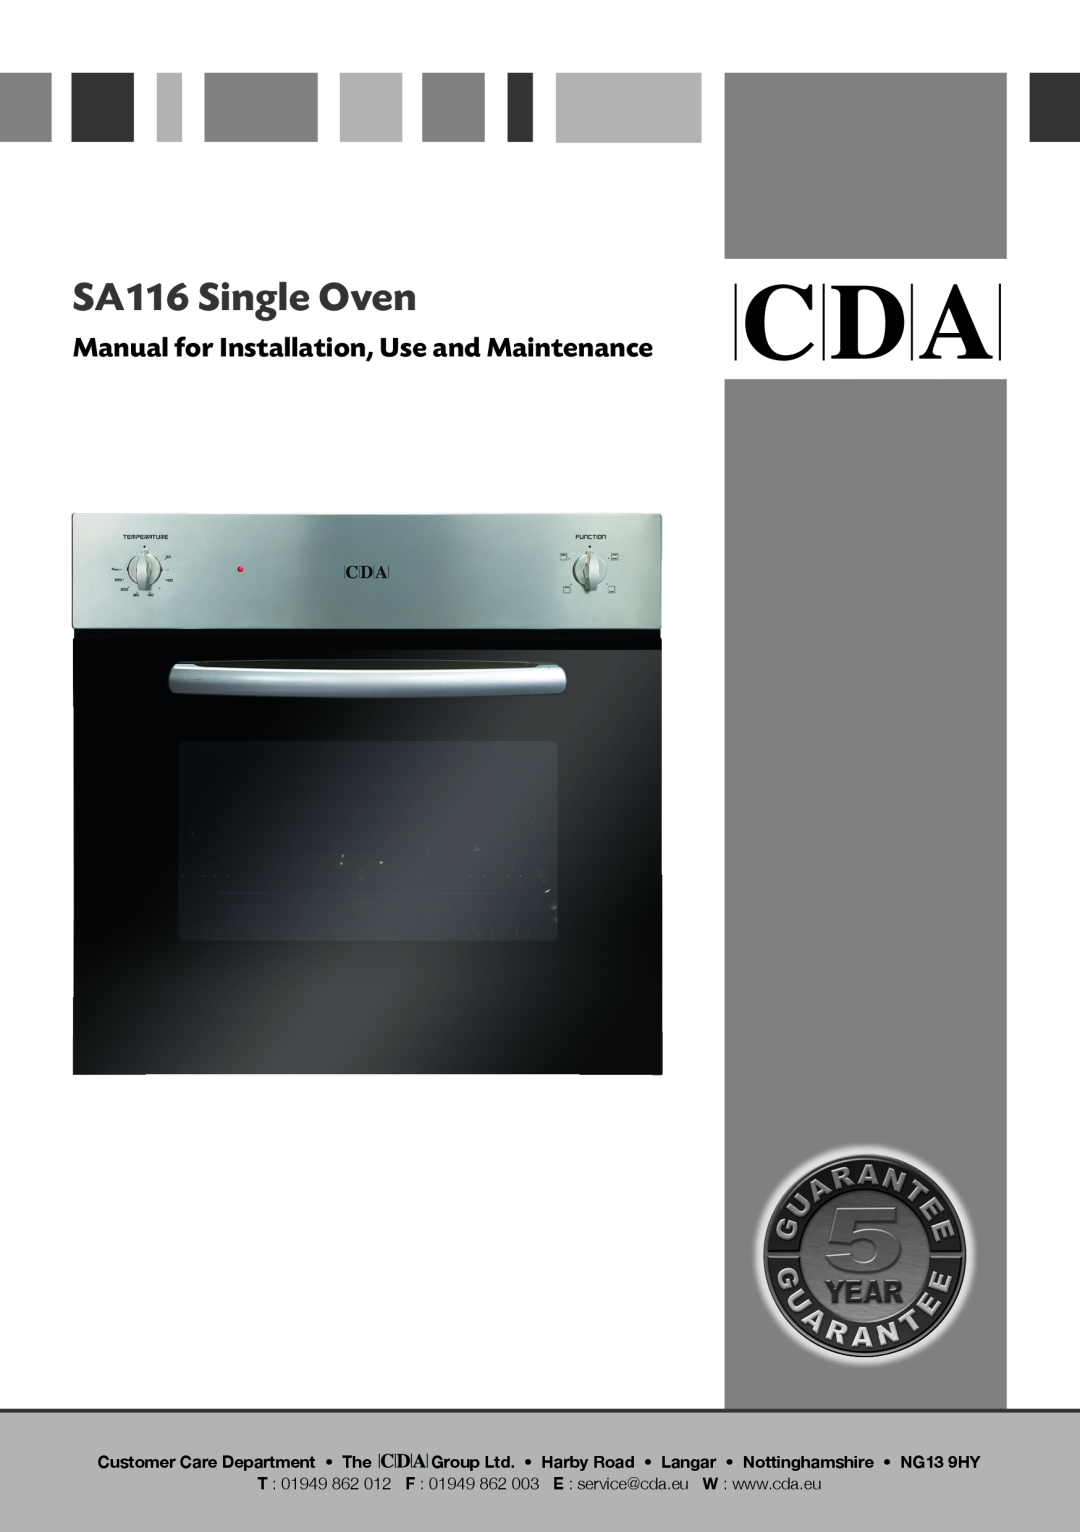 CDA manual SA116 Single Oven, Manual for Installation, Use and Maintenance, Customer Care Department The, T 01949 